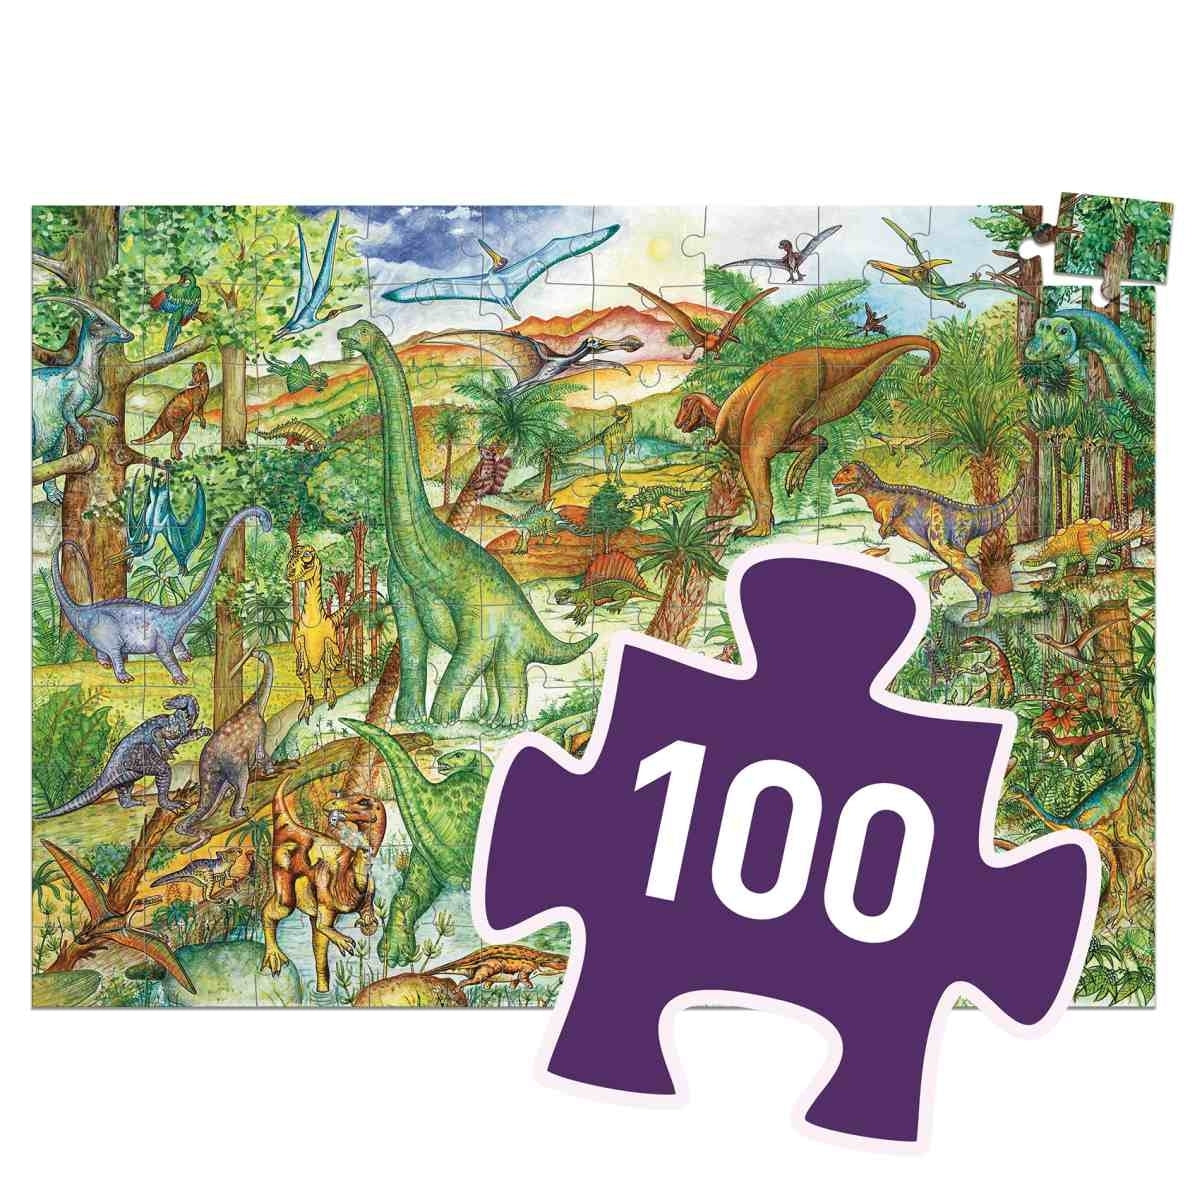 Puzzle Observation  100 Teile Dinosaurier | Djeco